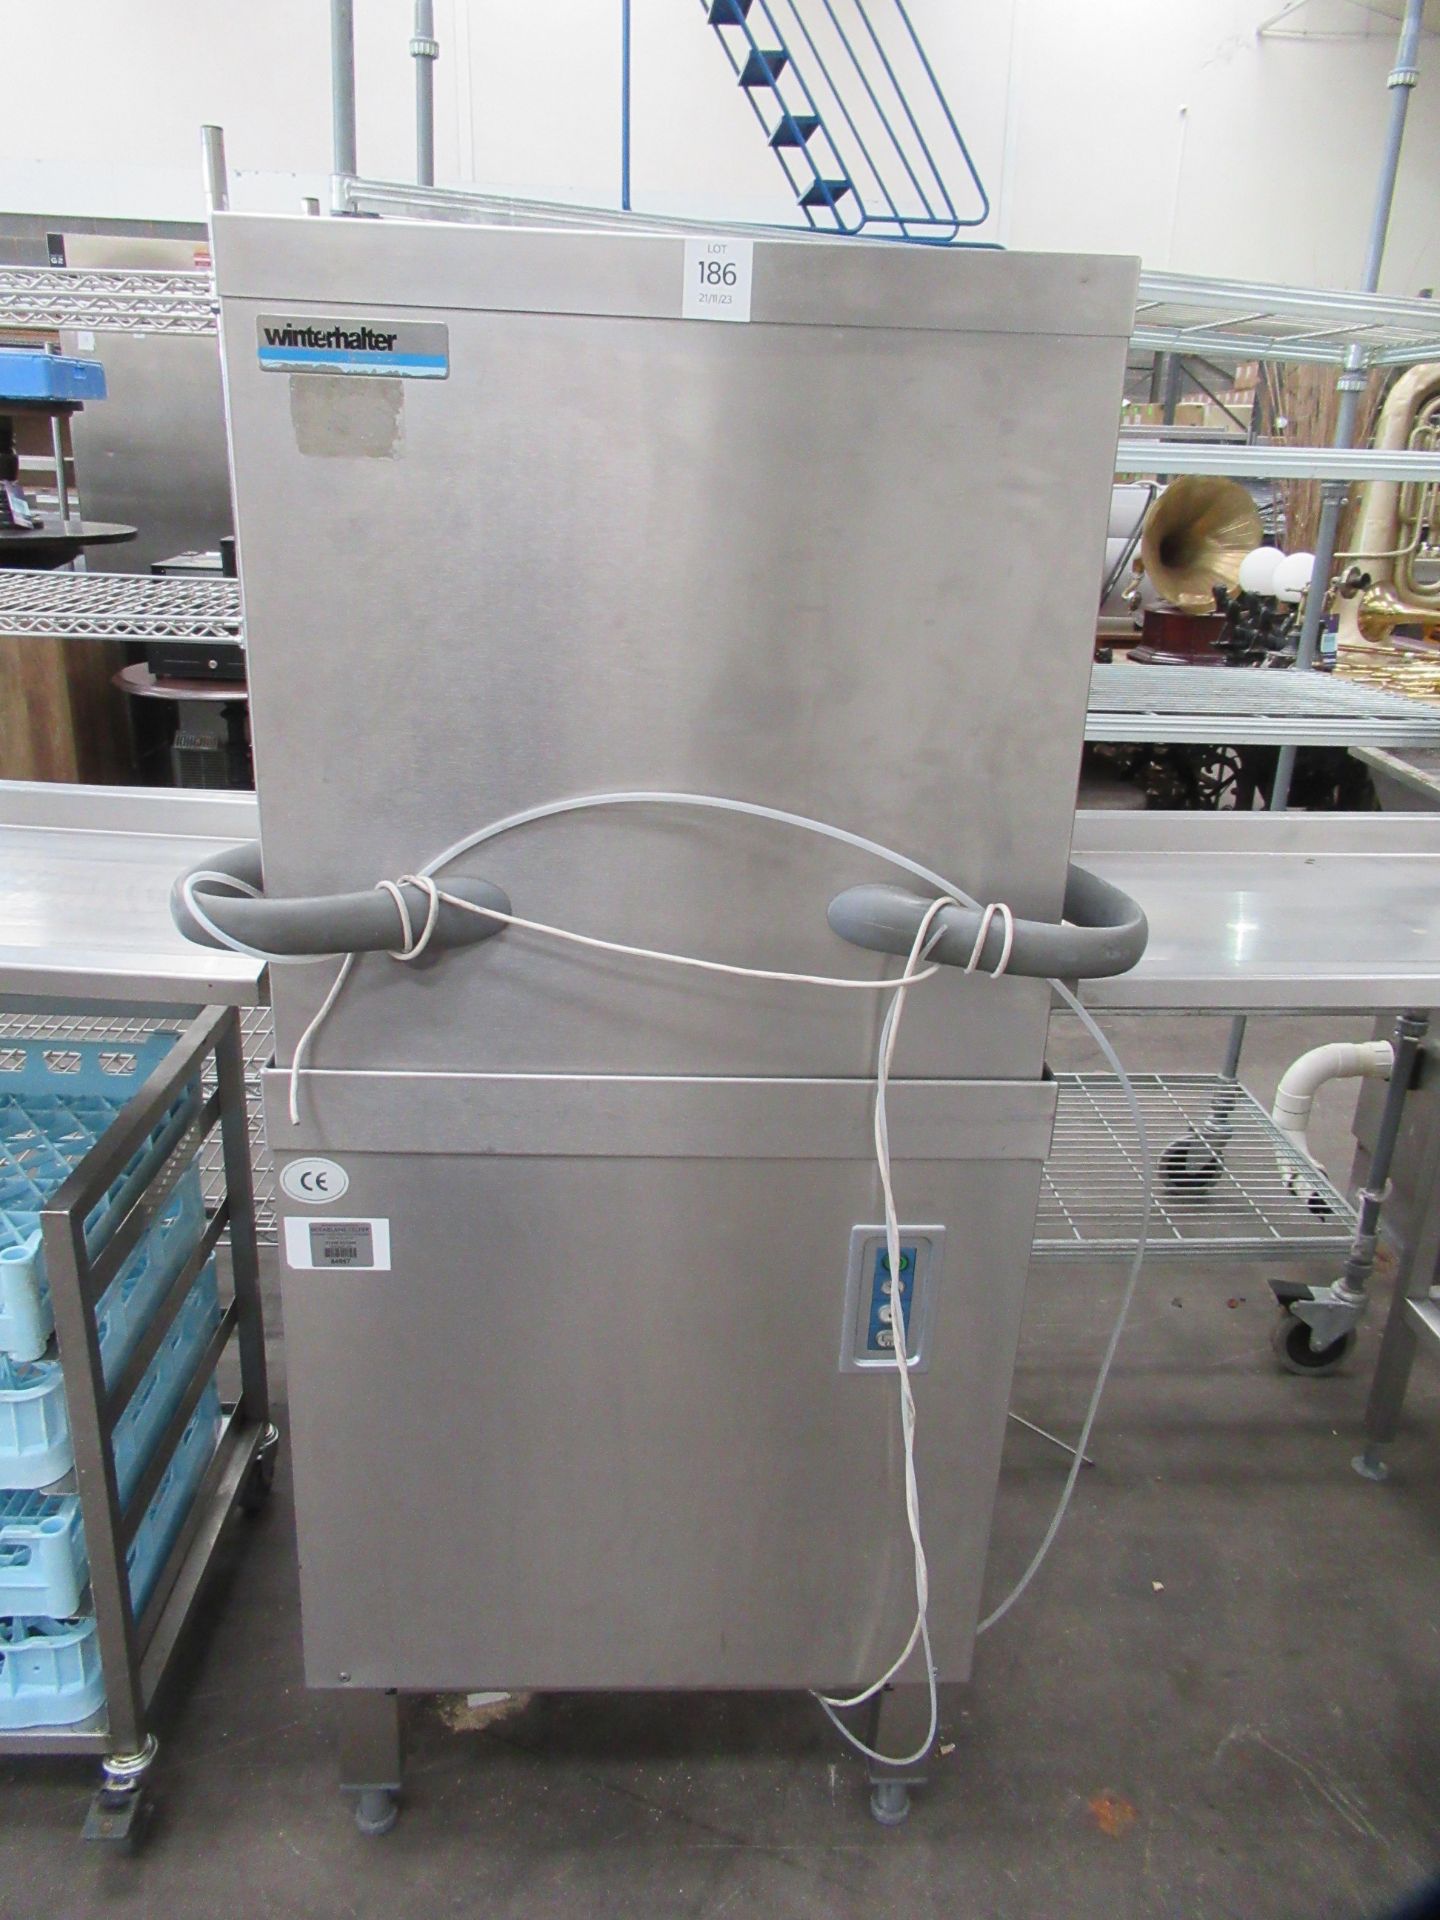 Winterhalter Commercial Dishwasher with Sink unit, Collection Table and Tray Storage Unit - Image 2 of 11